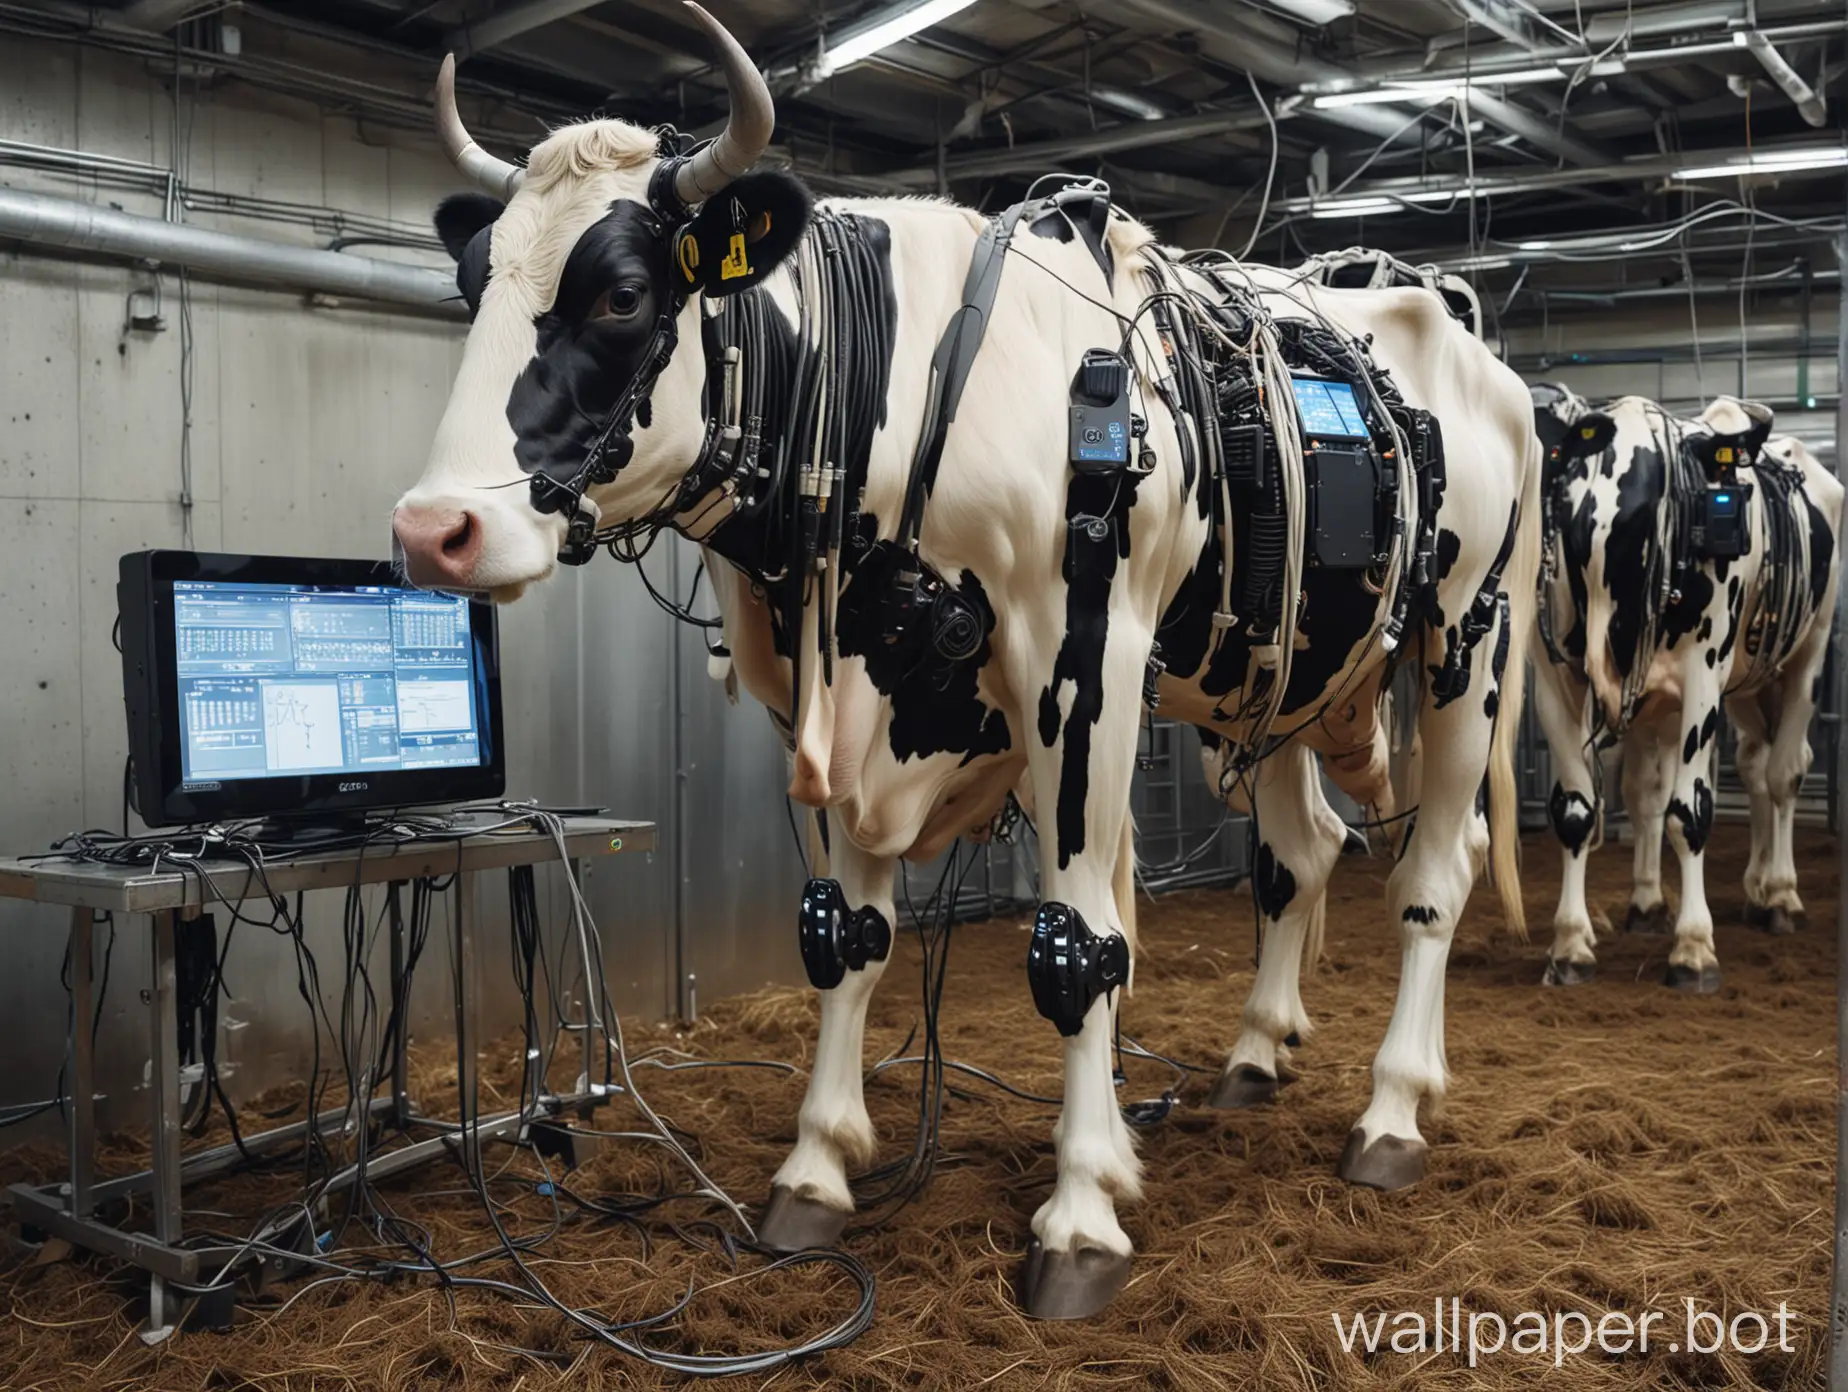 Futuristic-Bionic-Robot-Cows-with-Embedded-Screens-and-Cameras-Capturing-Milk-Production